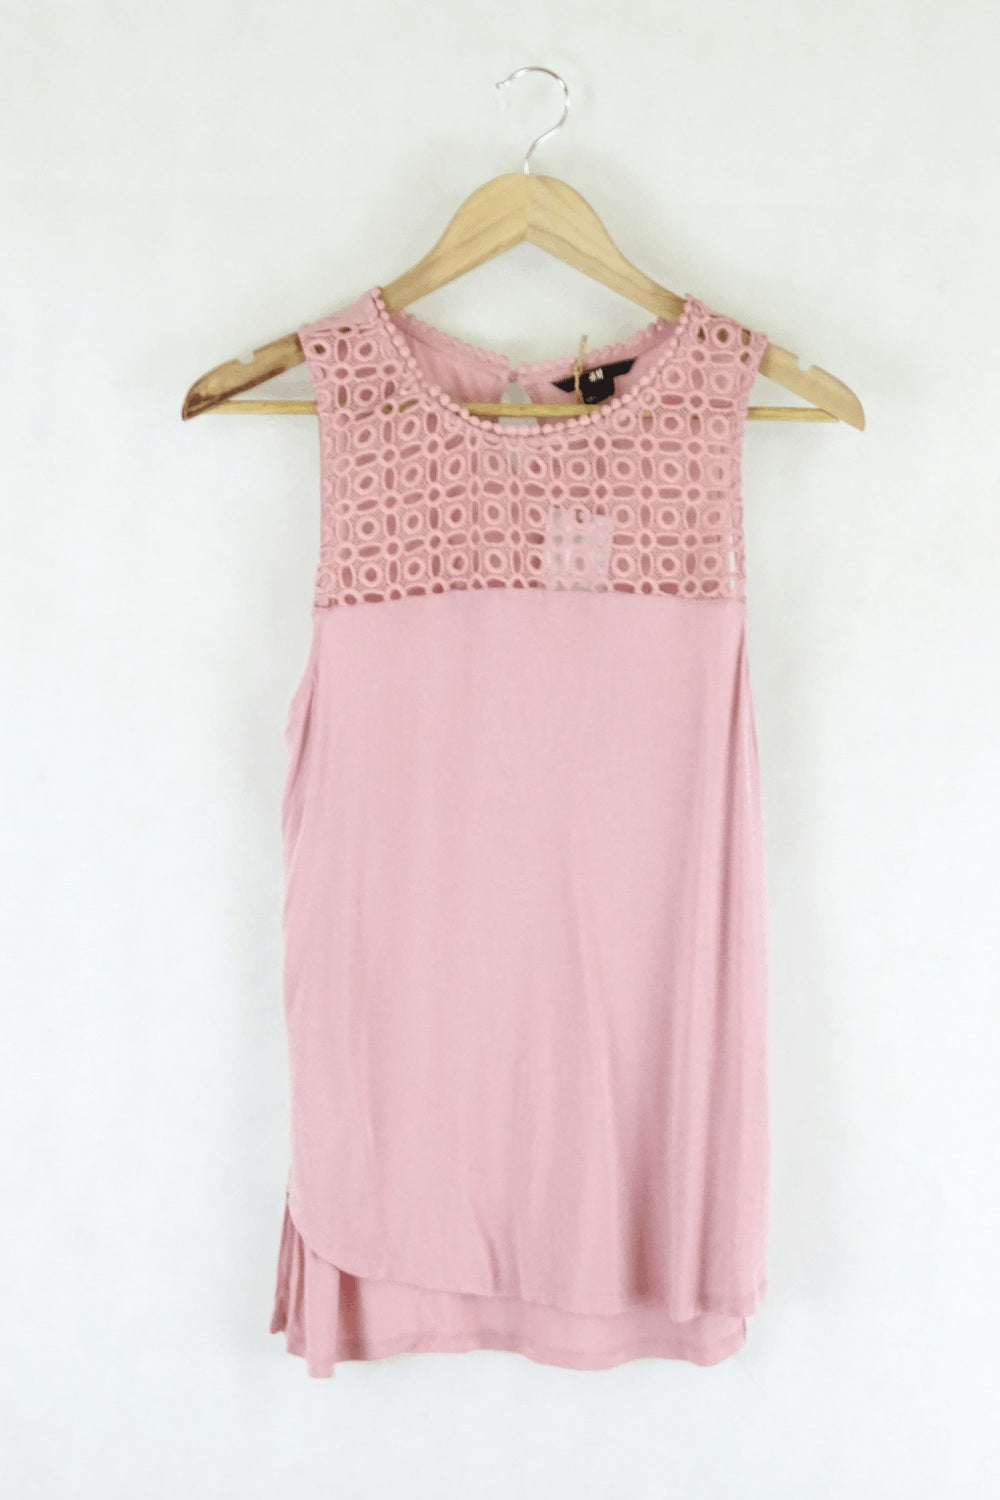 H&M Pink Lace Top S